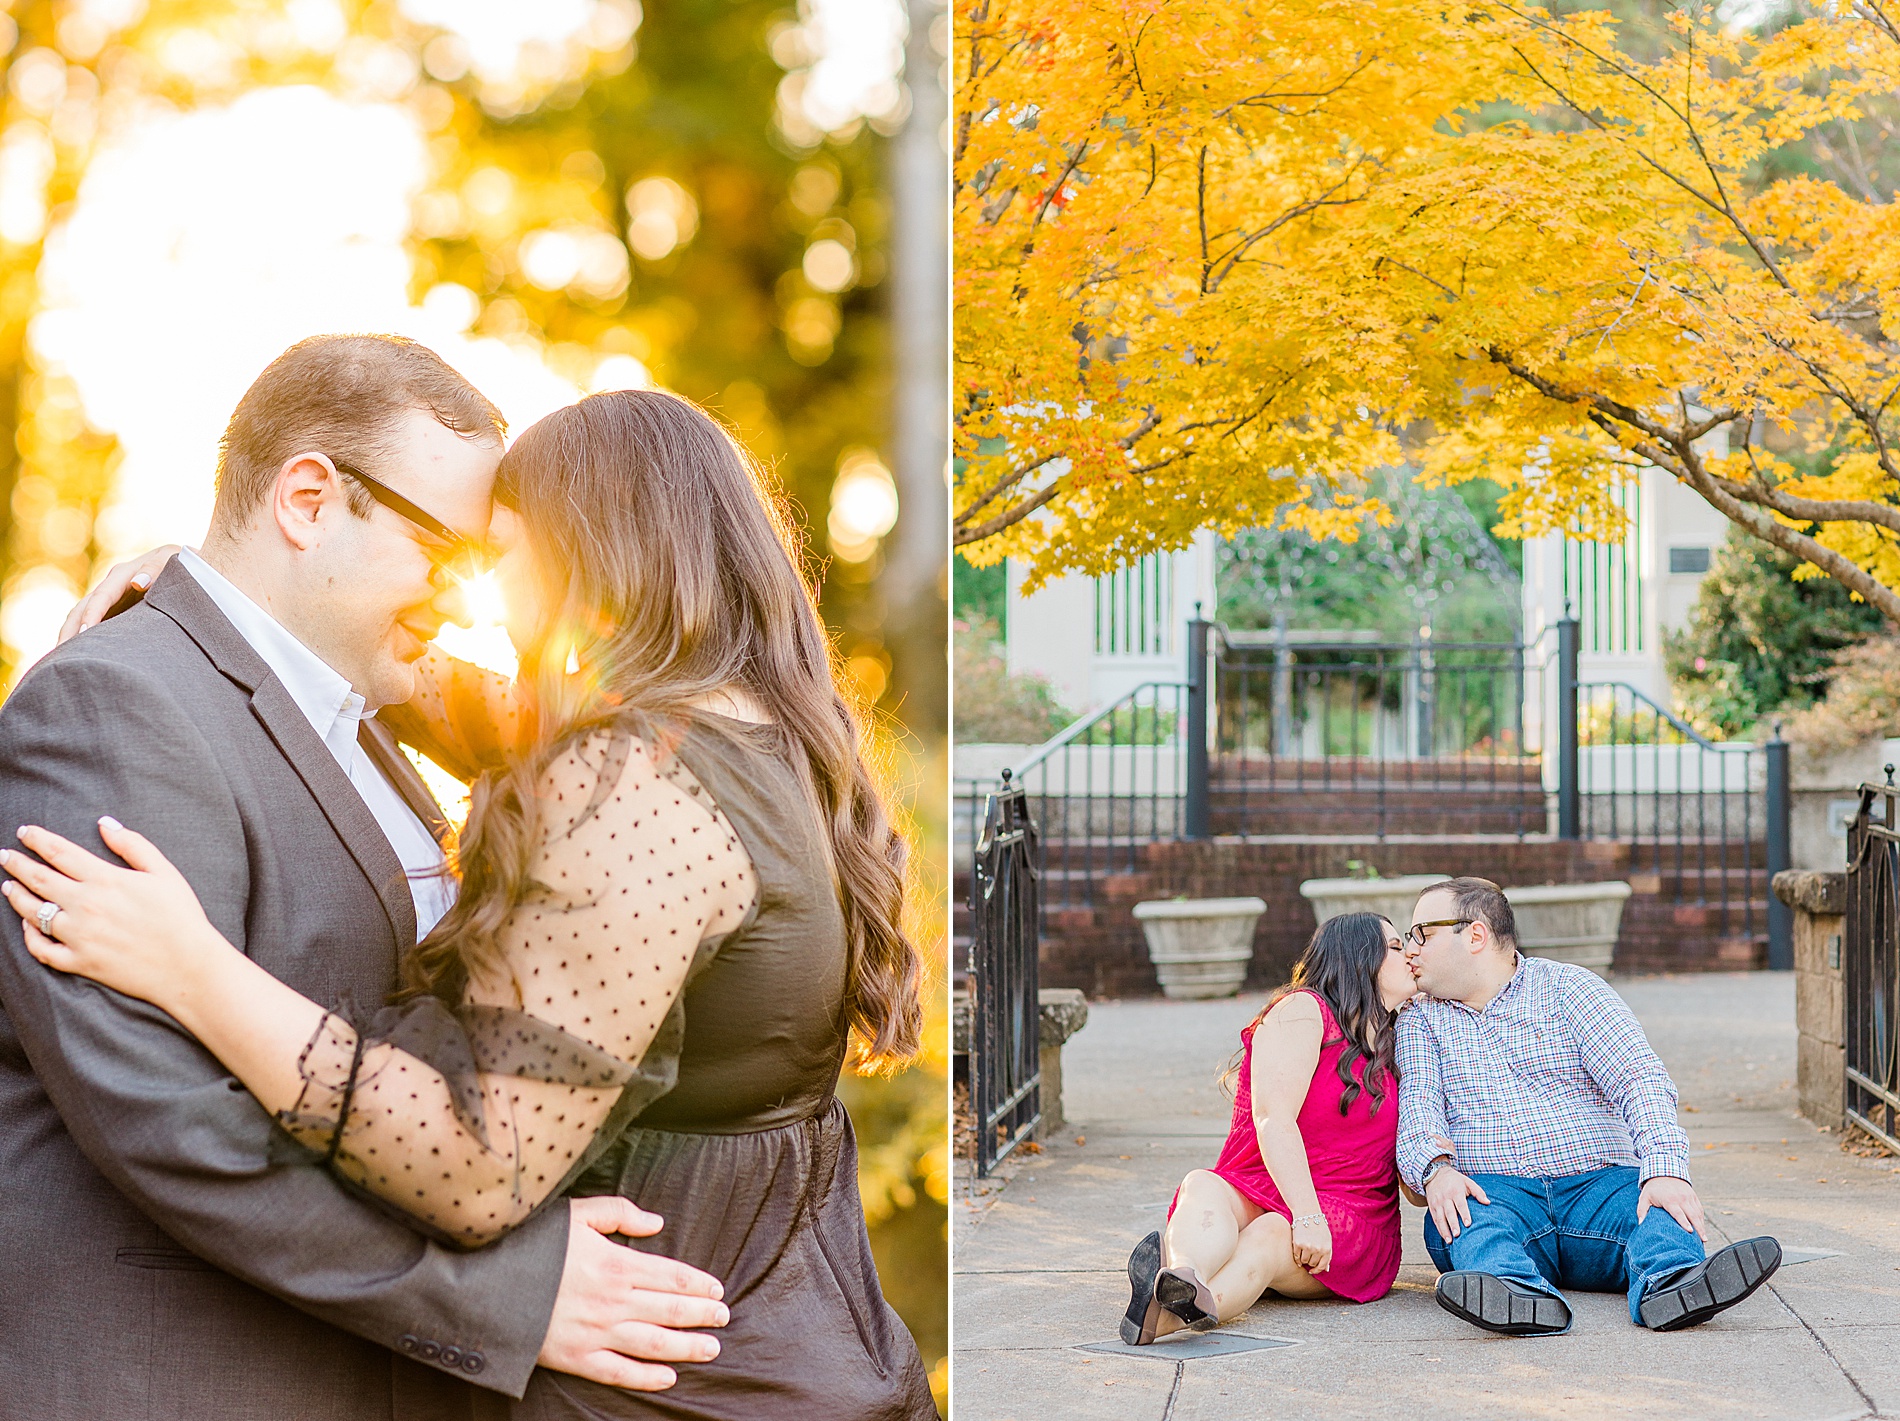 A Year of Birmingham Alabama Engagement Sessions: 2021 Review